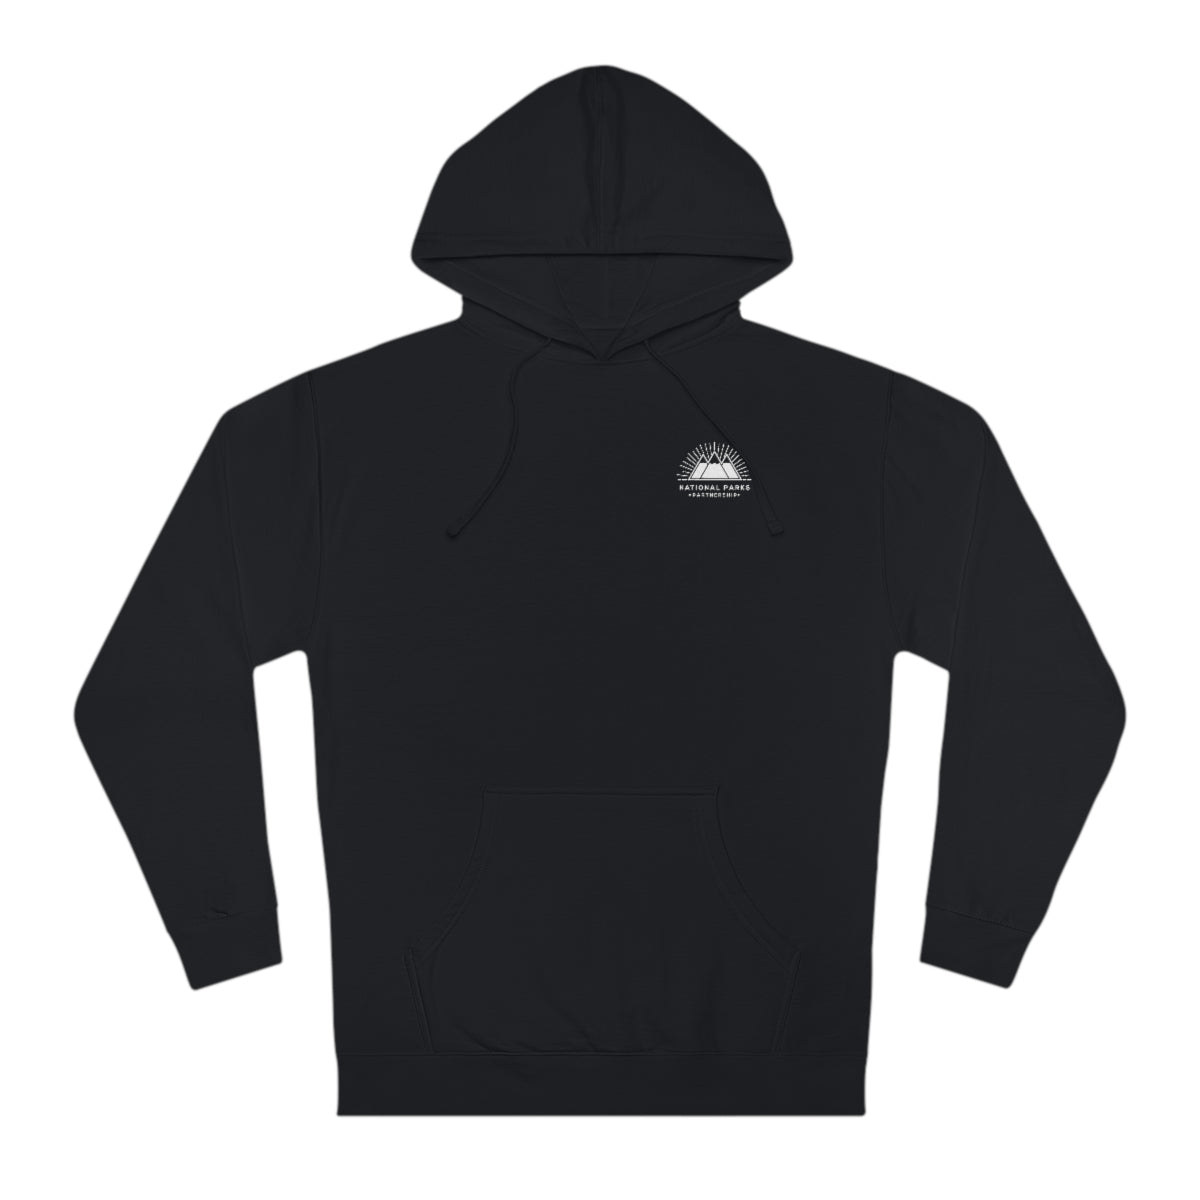 Cuyahoga Valley National Park Hoodie - Lines